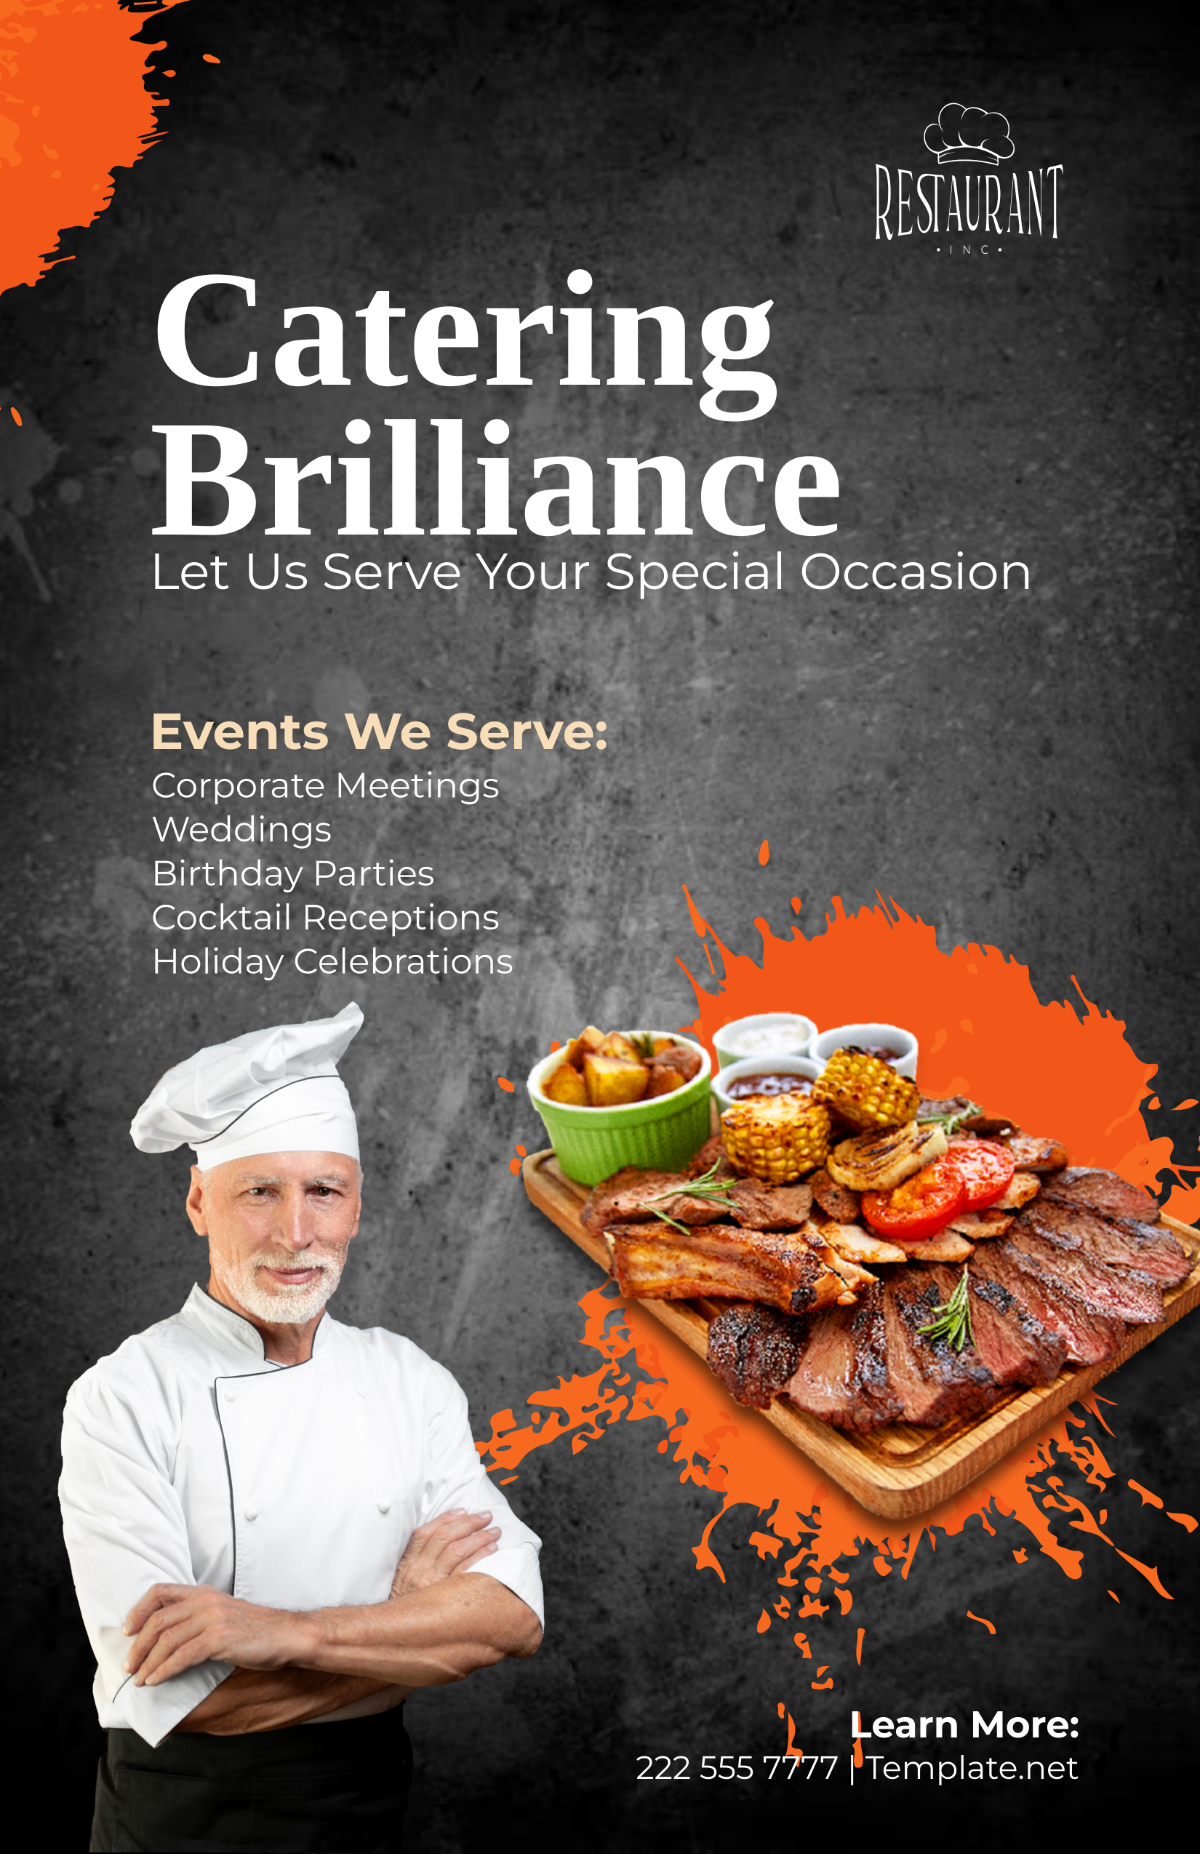 Restaurant Catering Poster Template